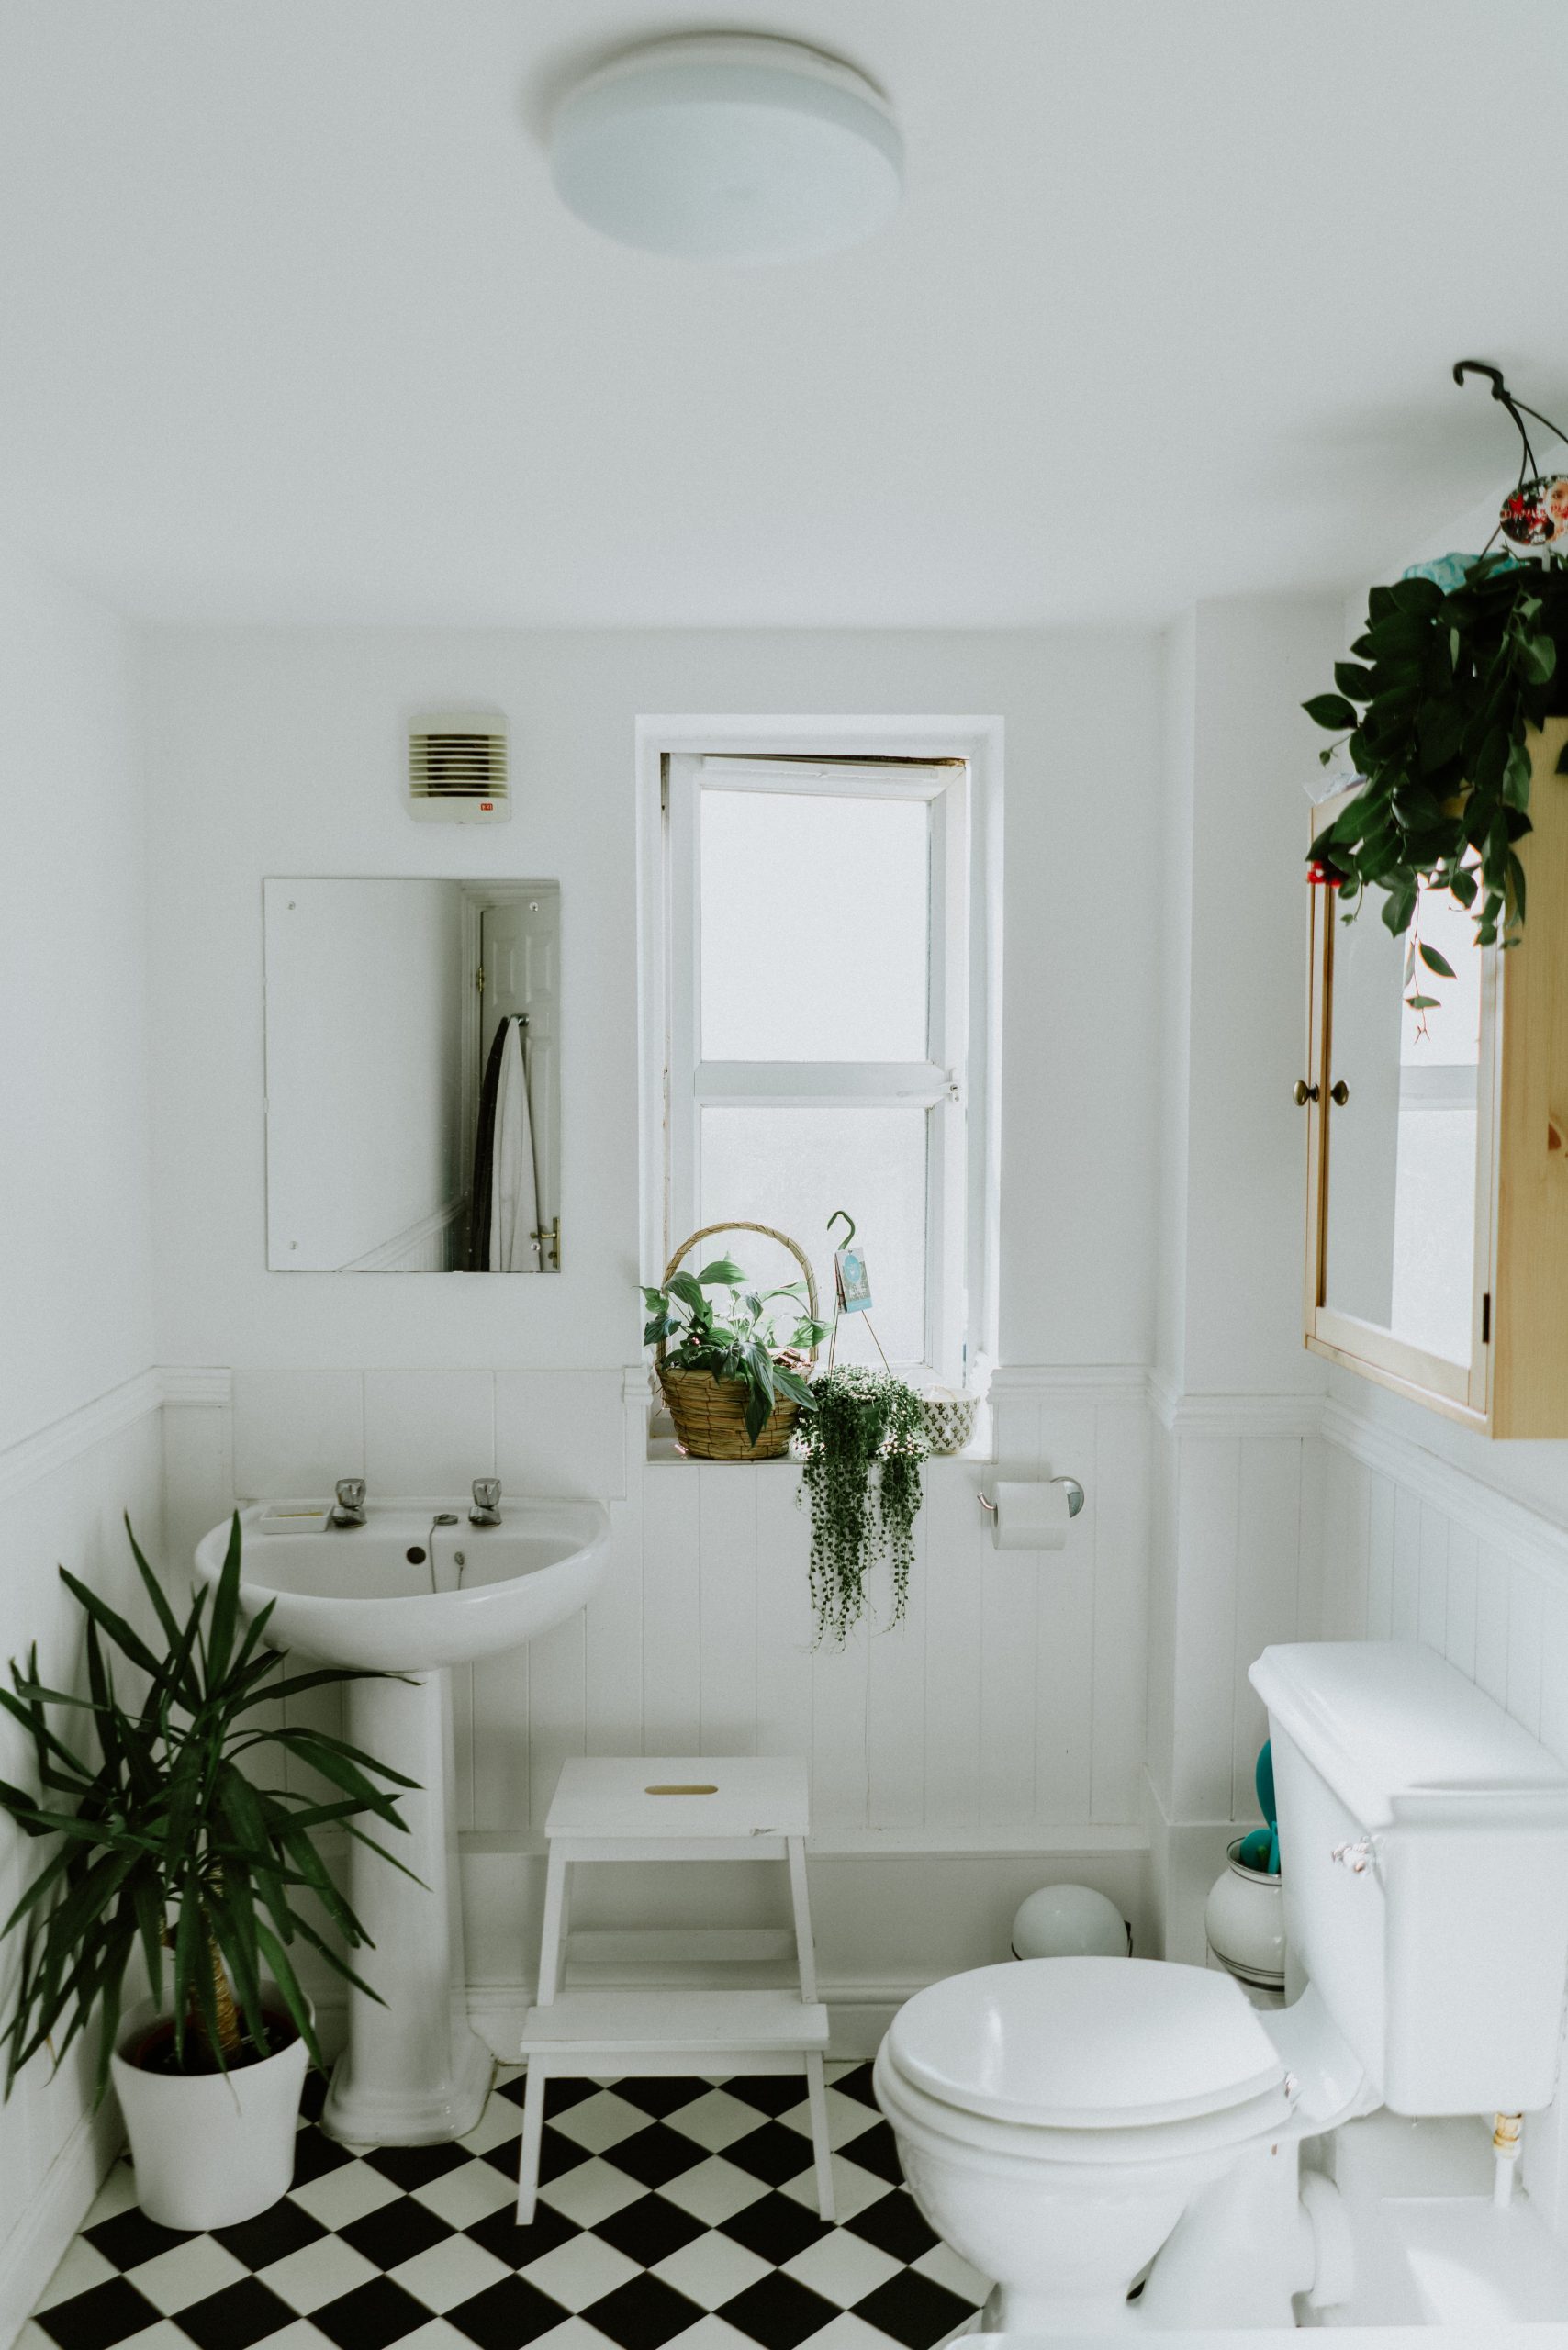 Zero waste bathroom: 3 spots for blueing up!